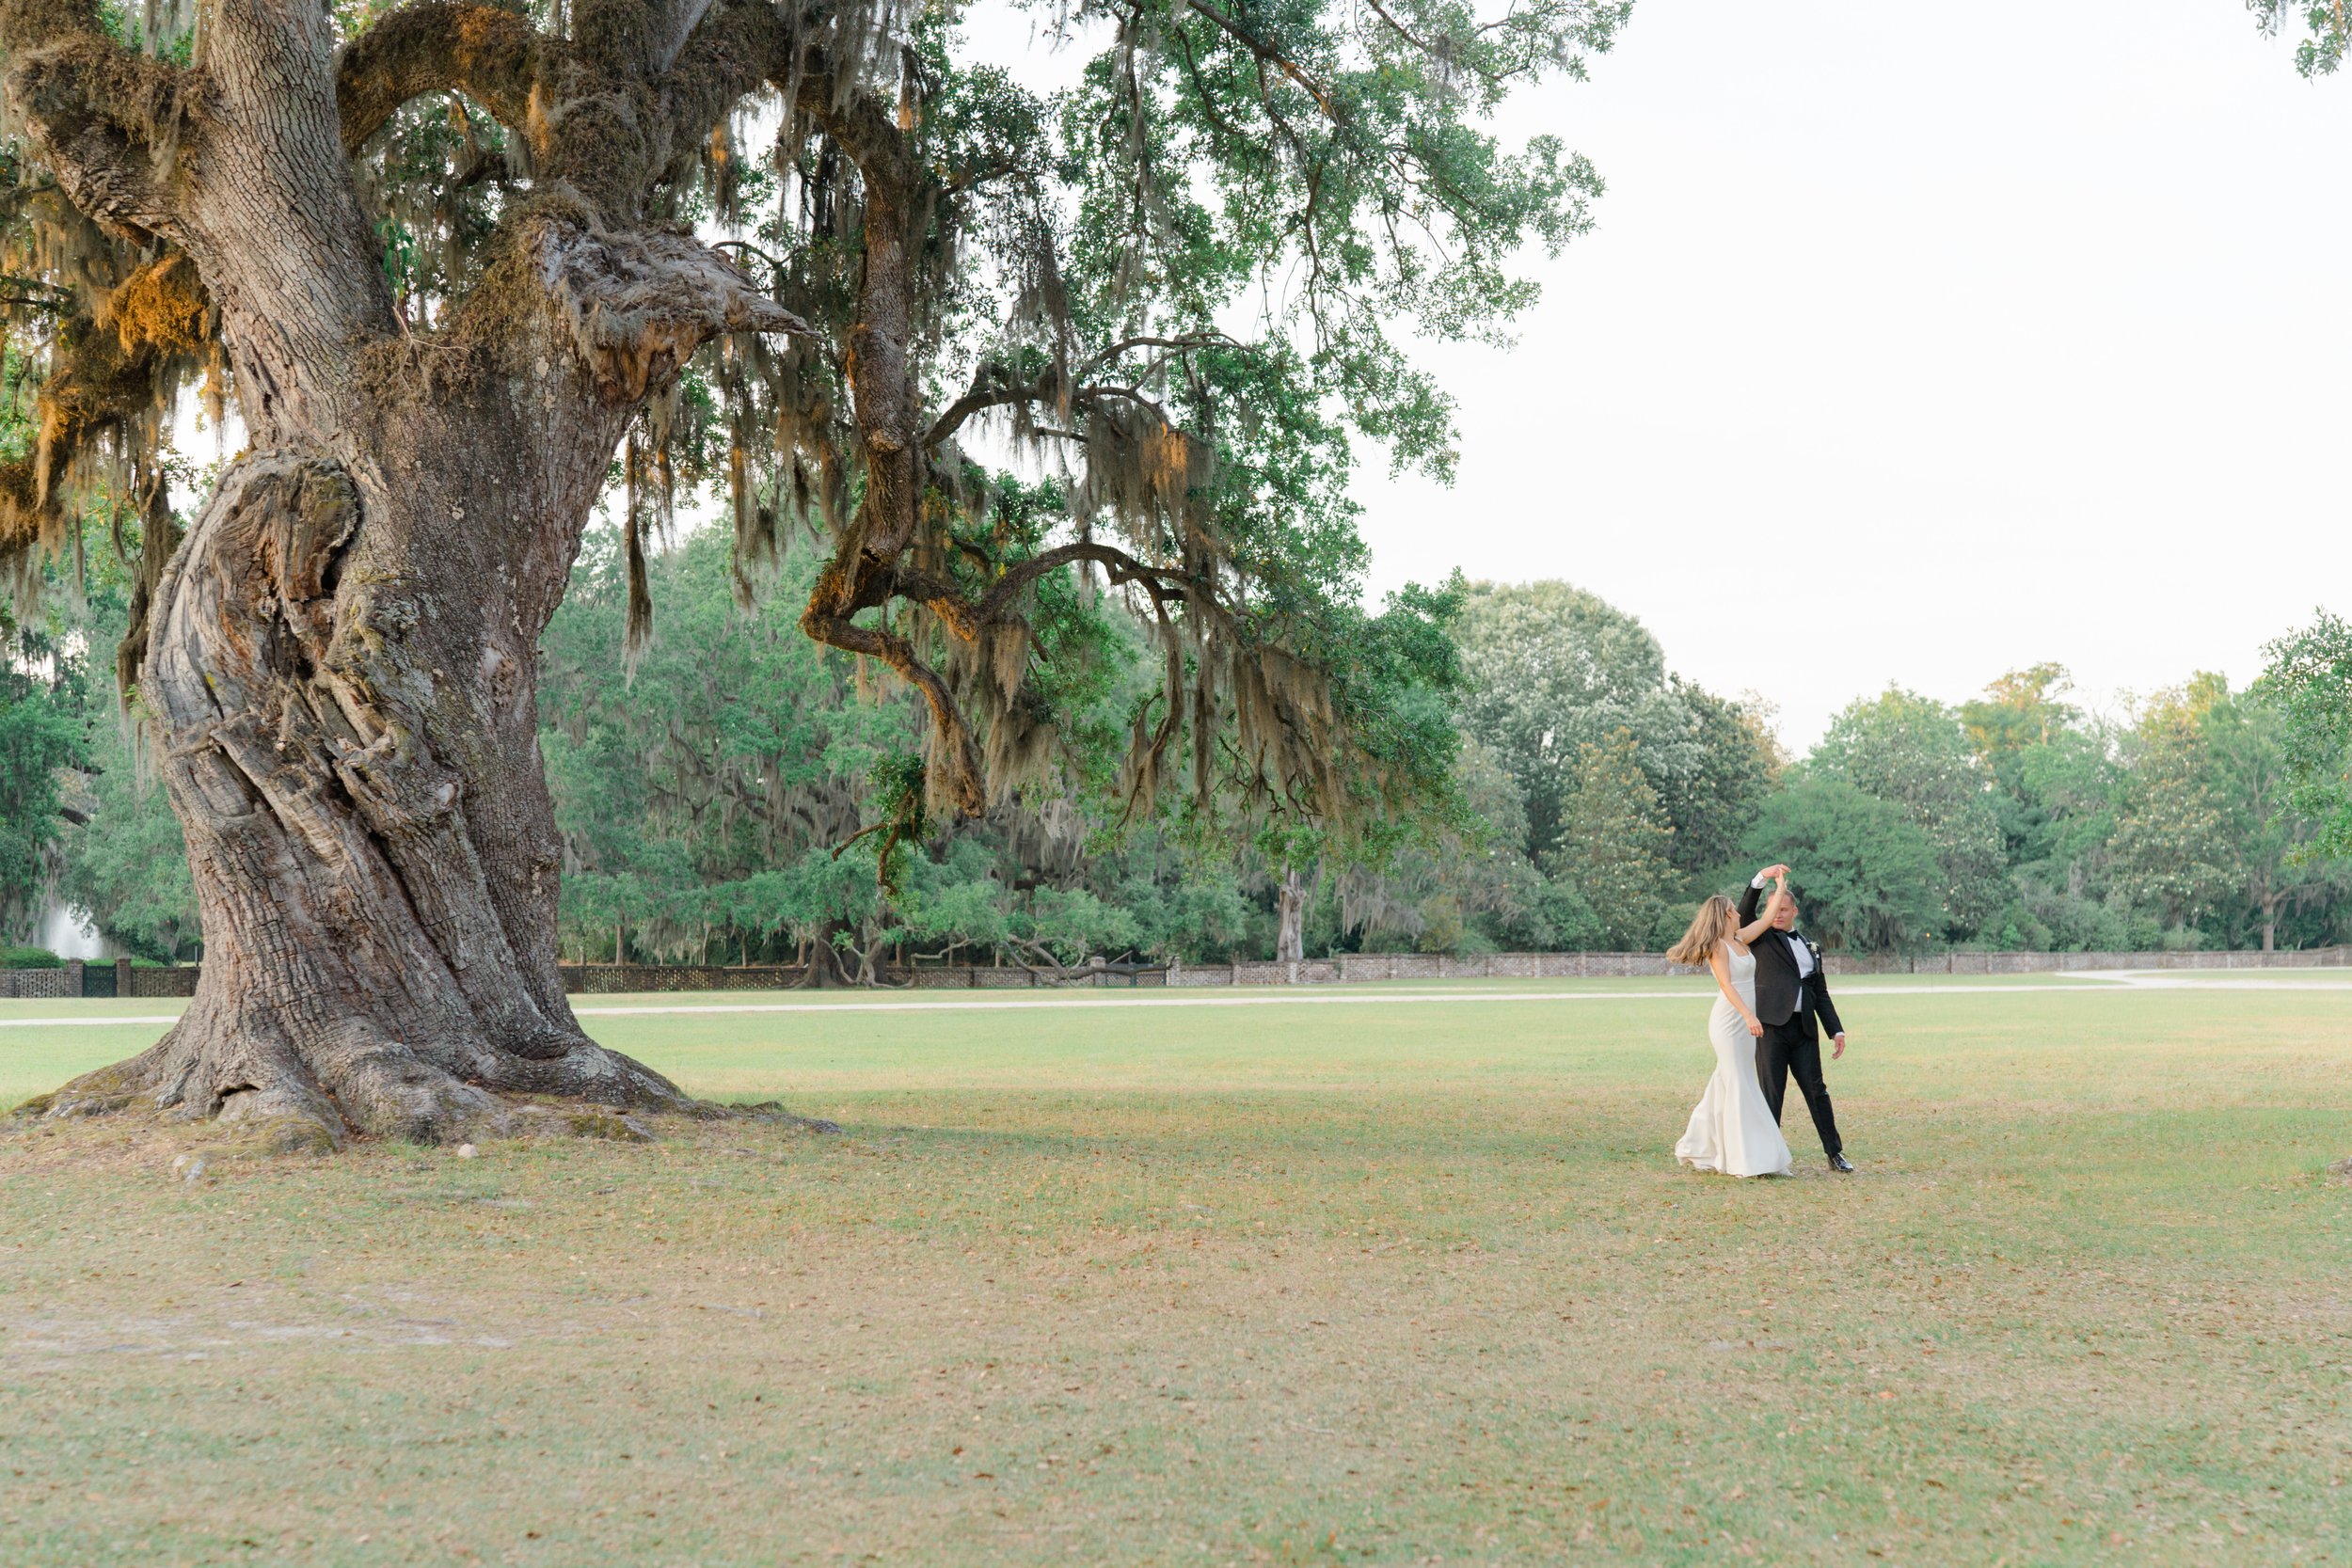 Middleton Place bride and groom dancing in field with old live oak tree